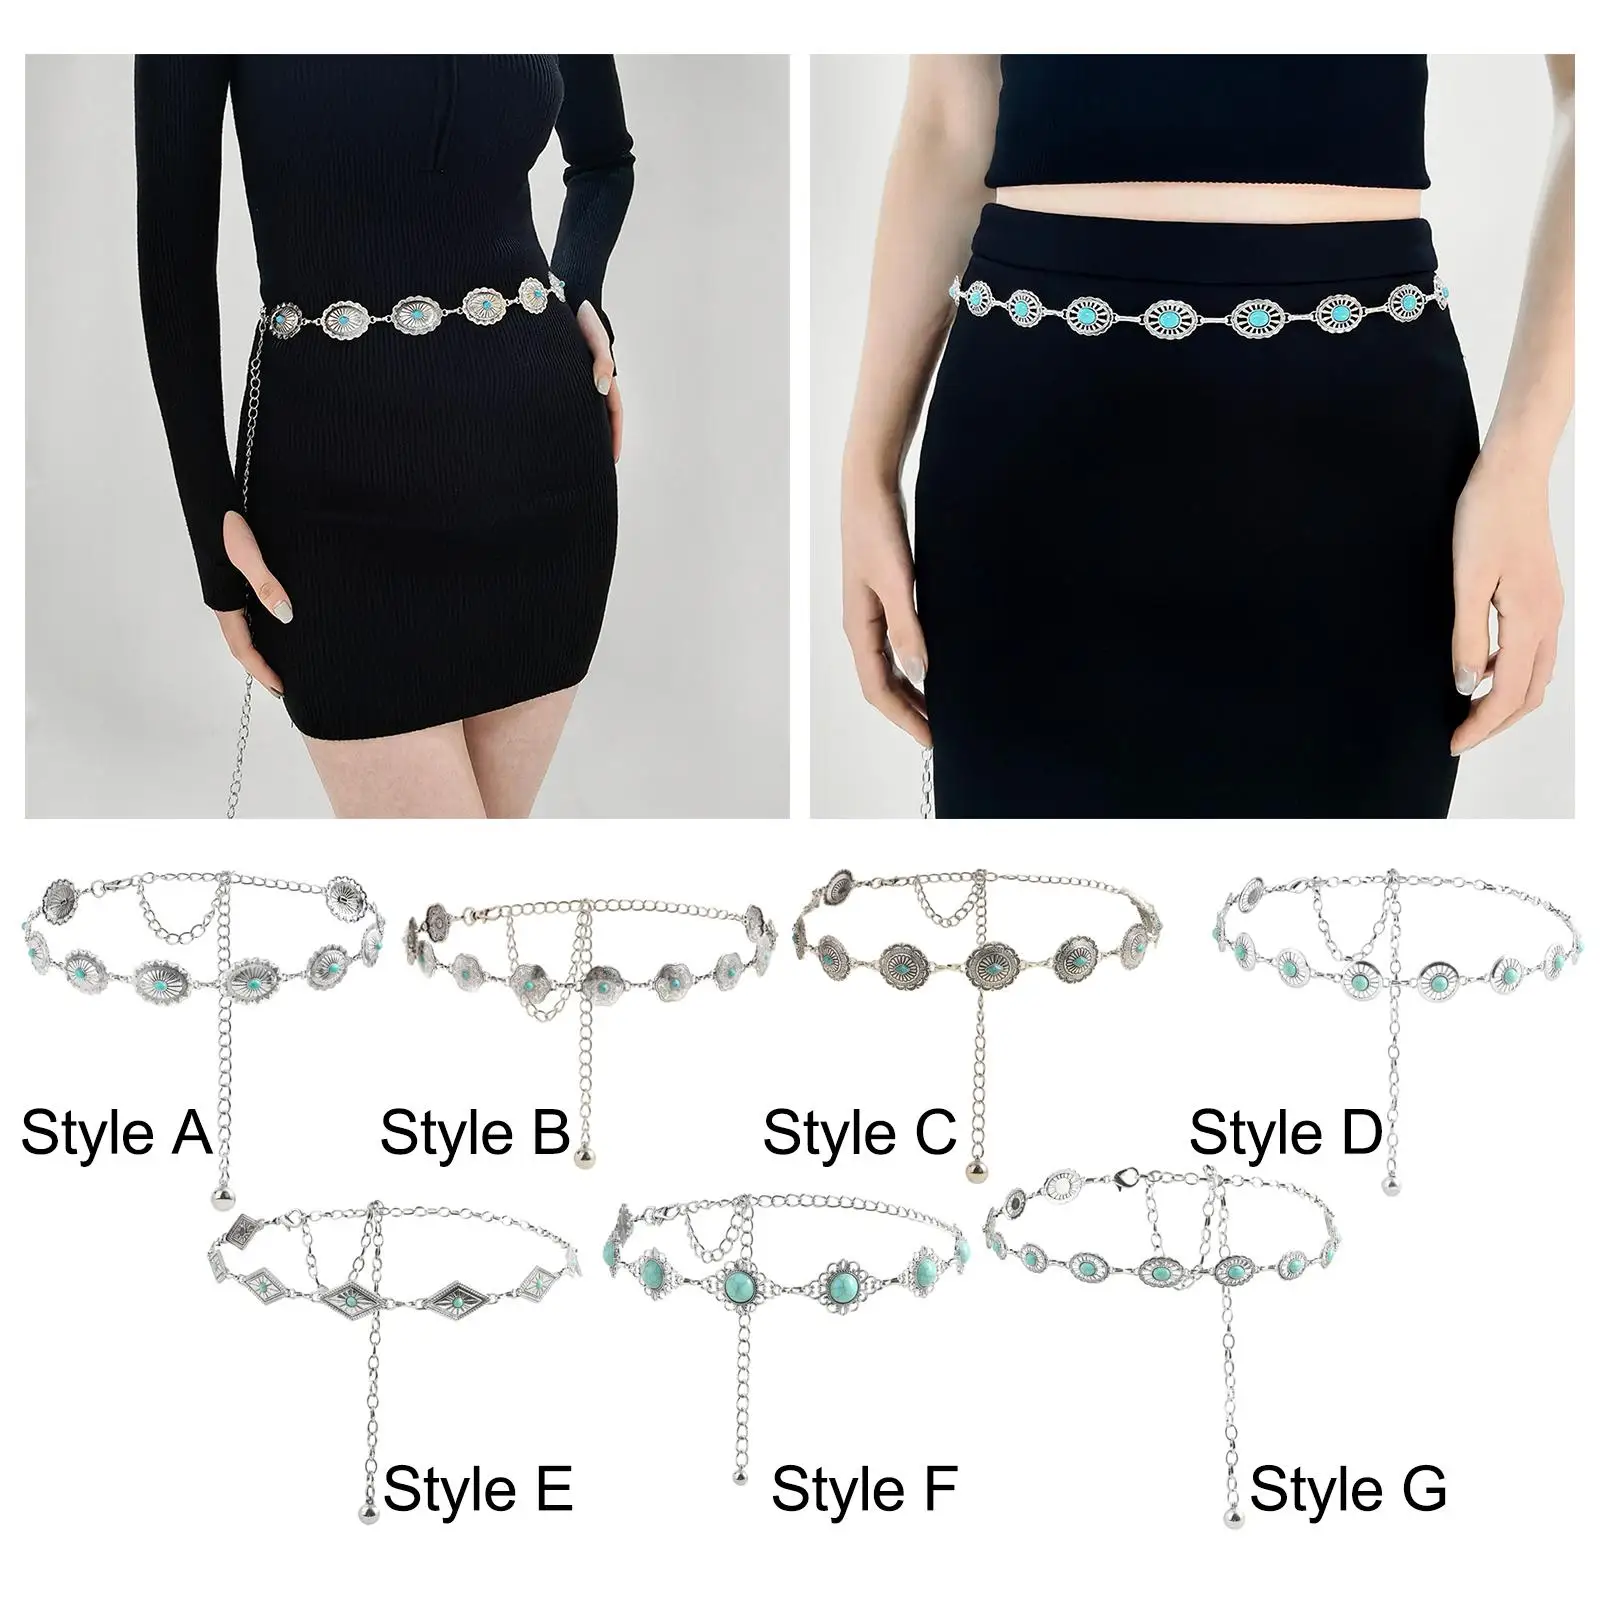 Metal Waist Chain Belt for Women Casual Belly Chain Metal Belt Fashion Decorative Waistband for Dresses Shirts Costume Jeans